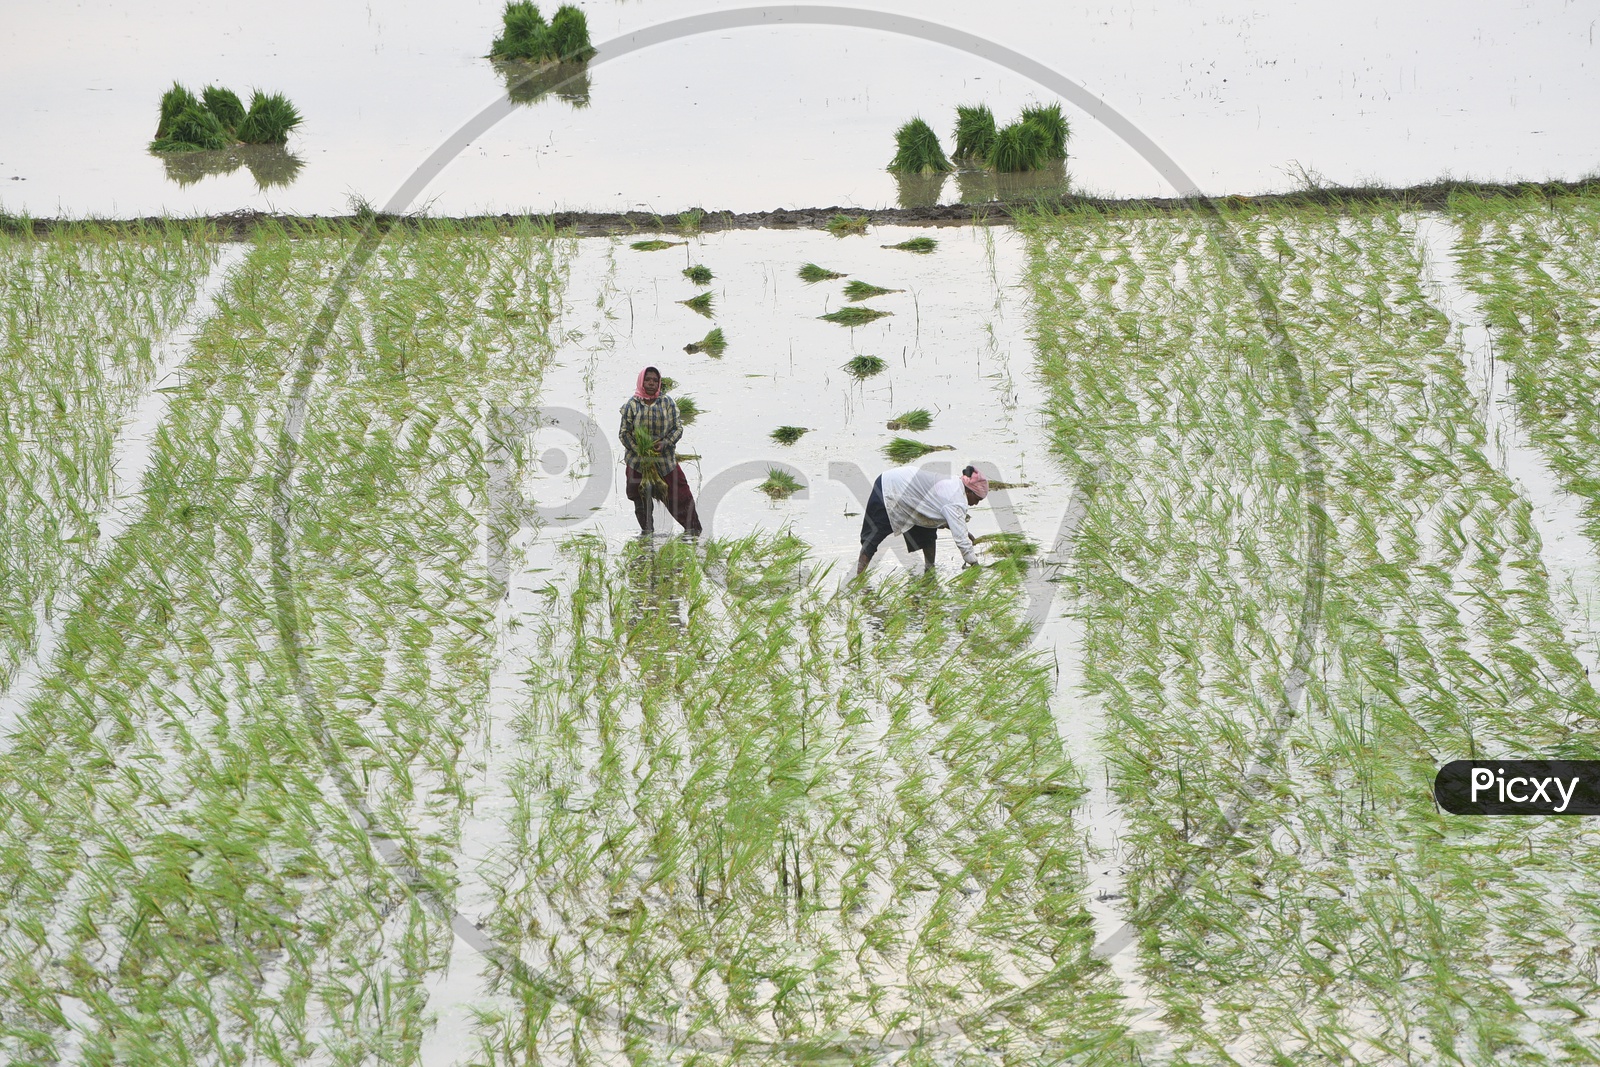 People working in agriculture fields